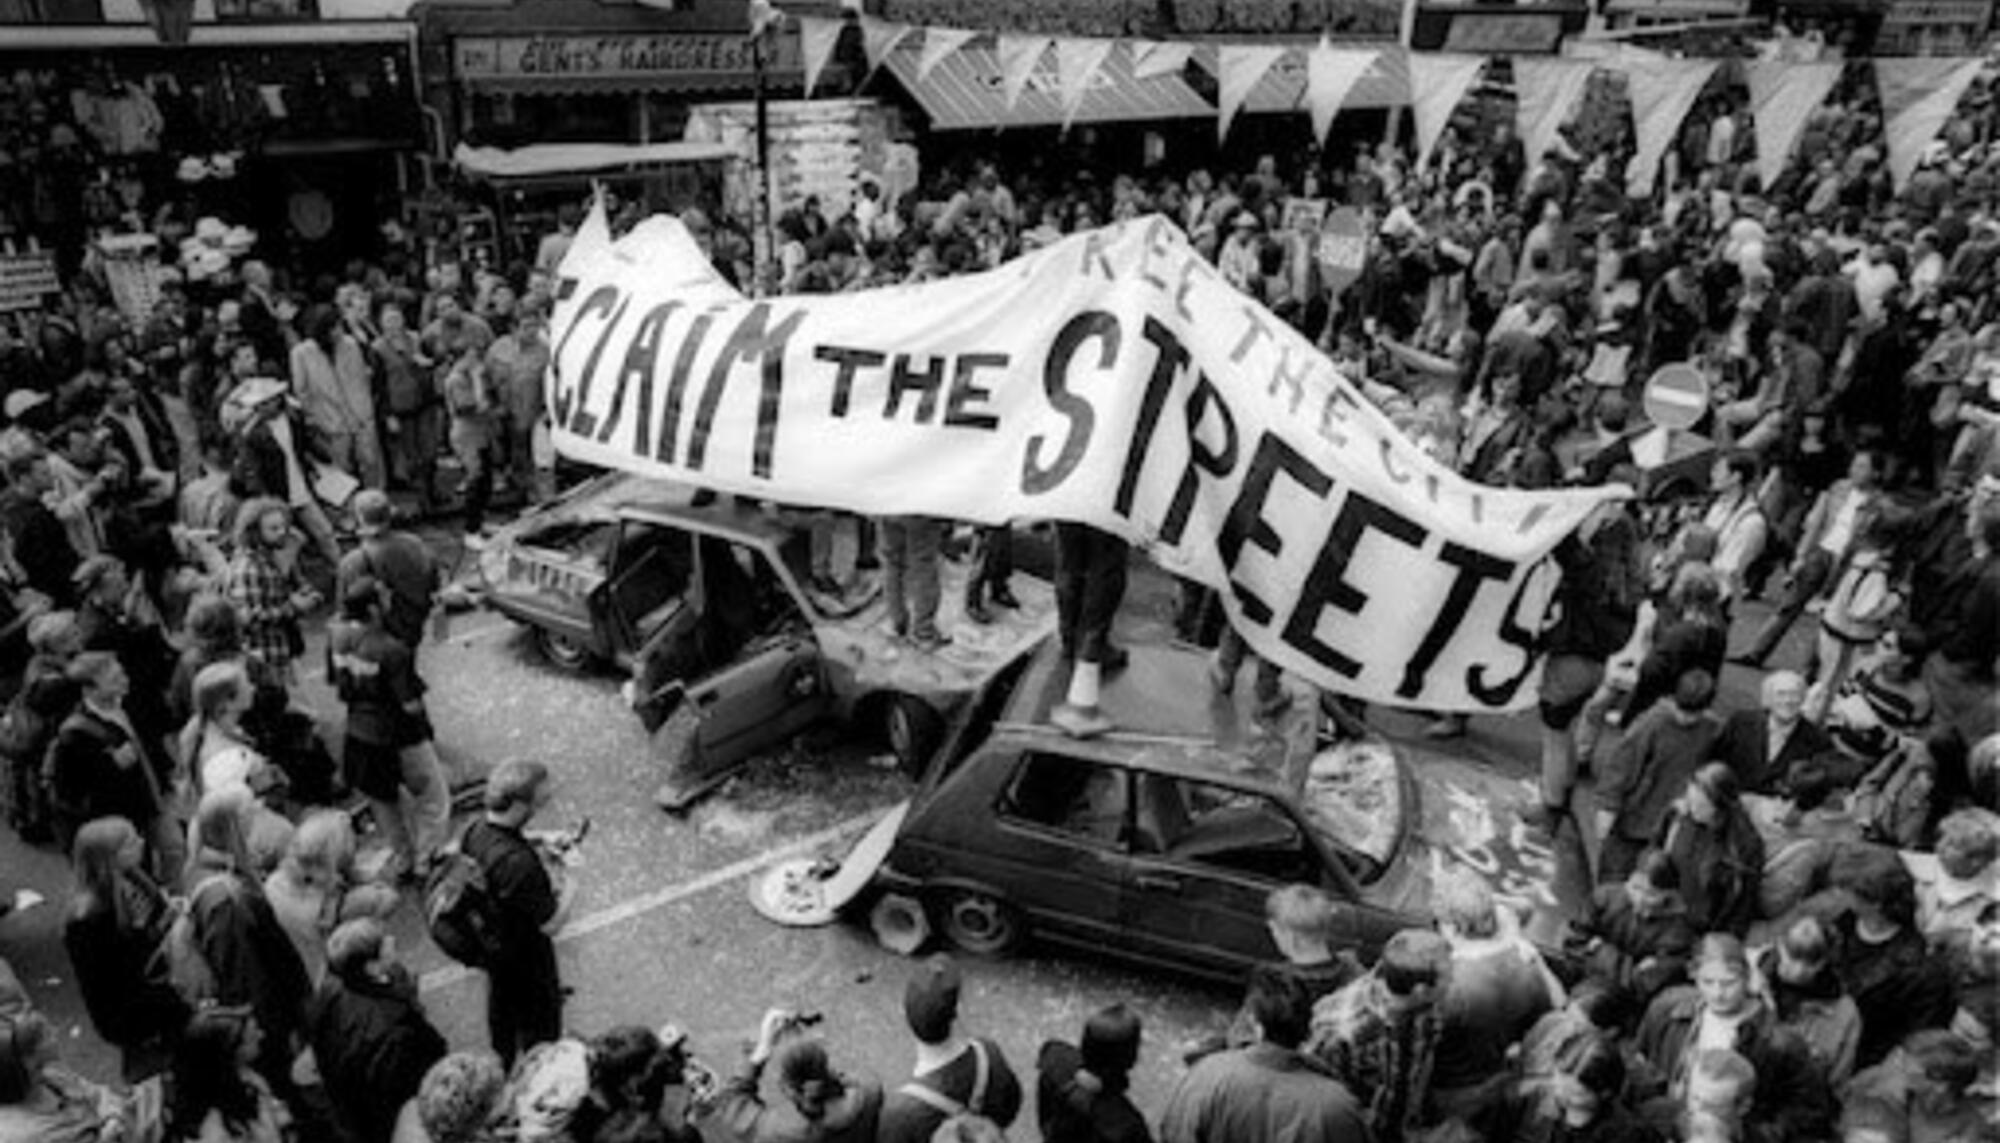 Reclaim the Streets occupation 14 May 1995